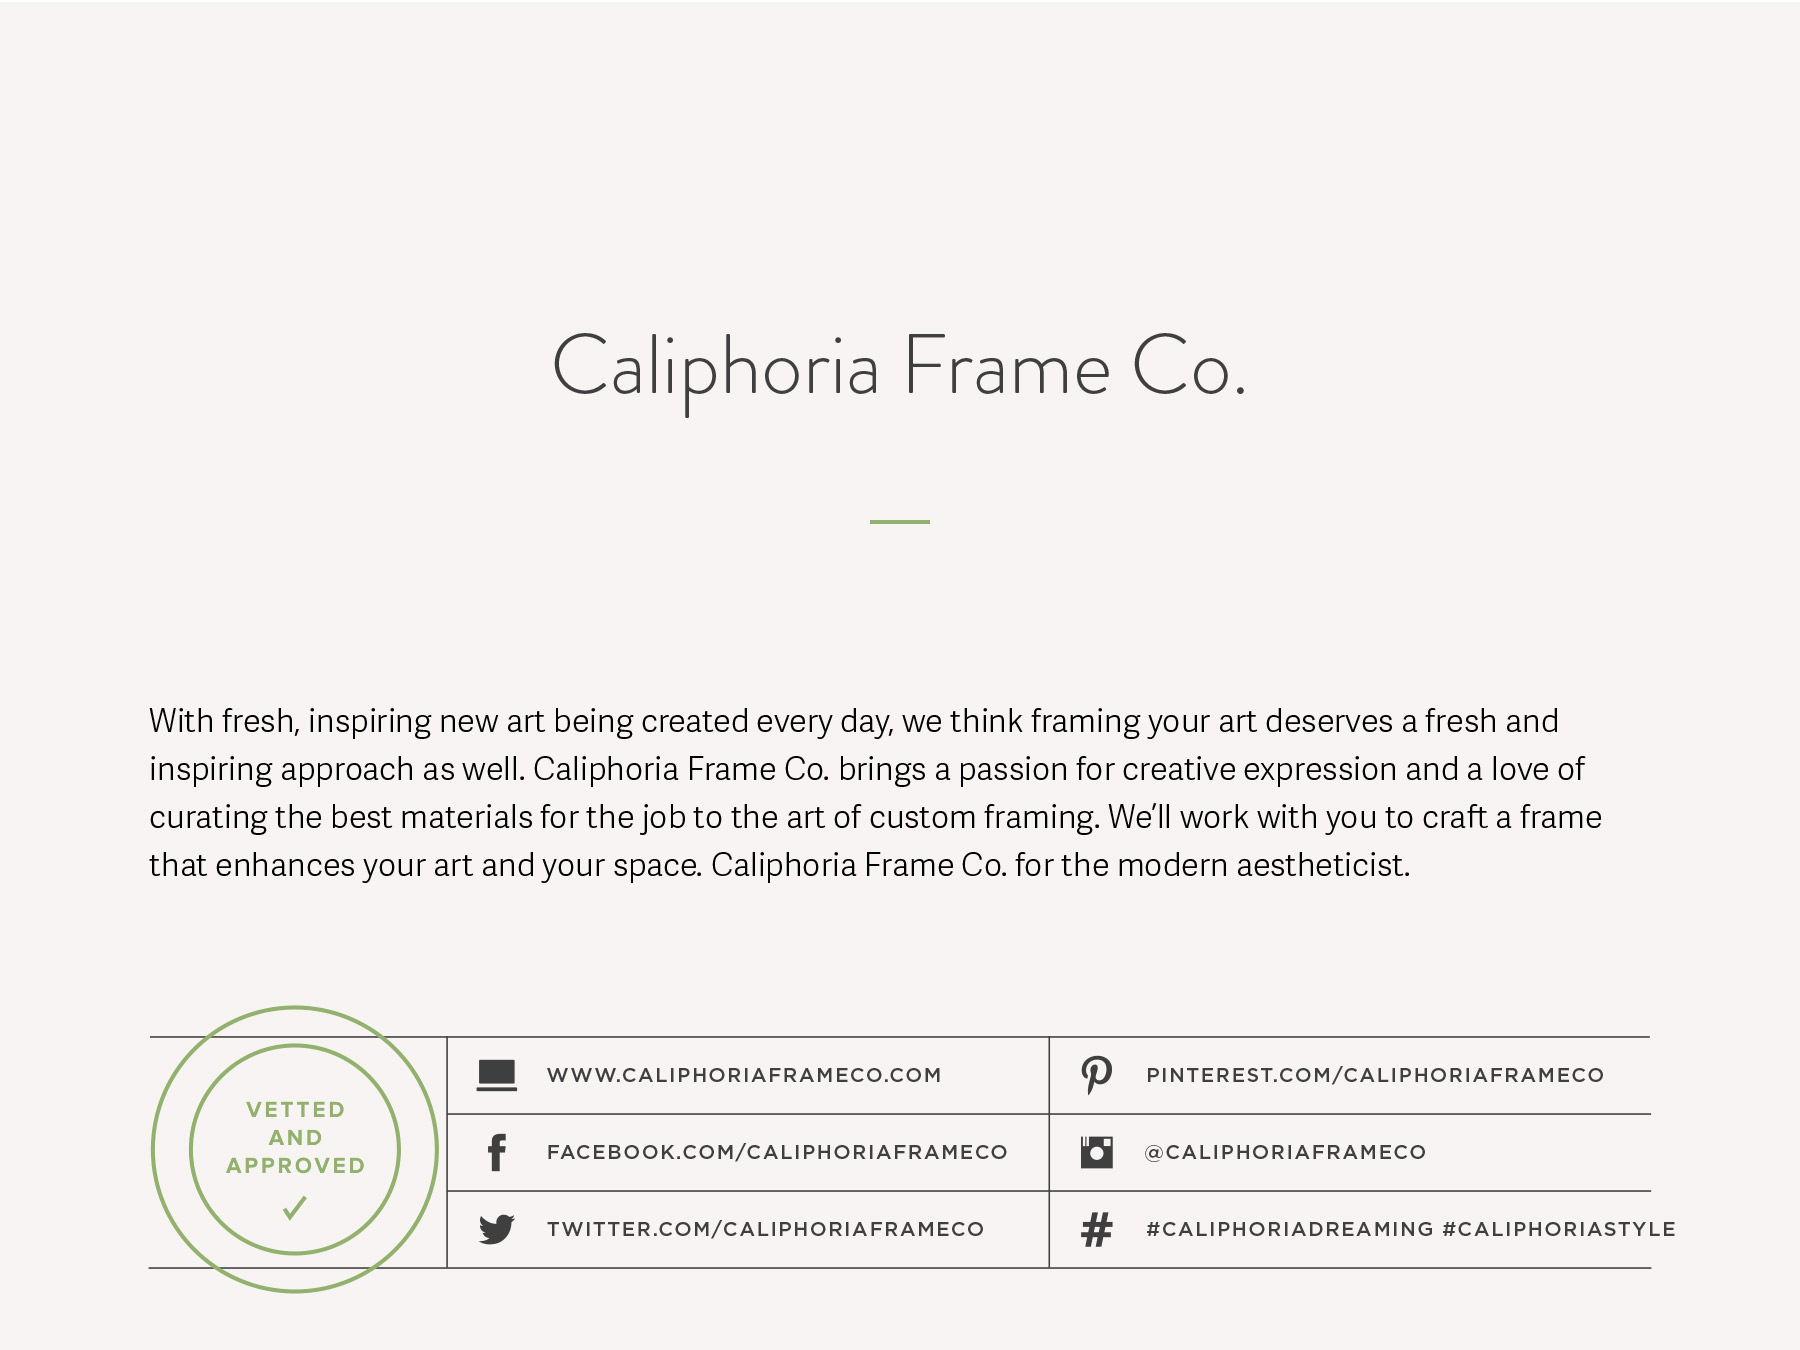 Small business naming for a custom frame and display design studio with a modern, customer-centric approach